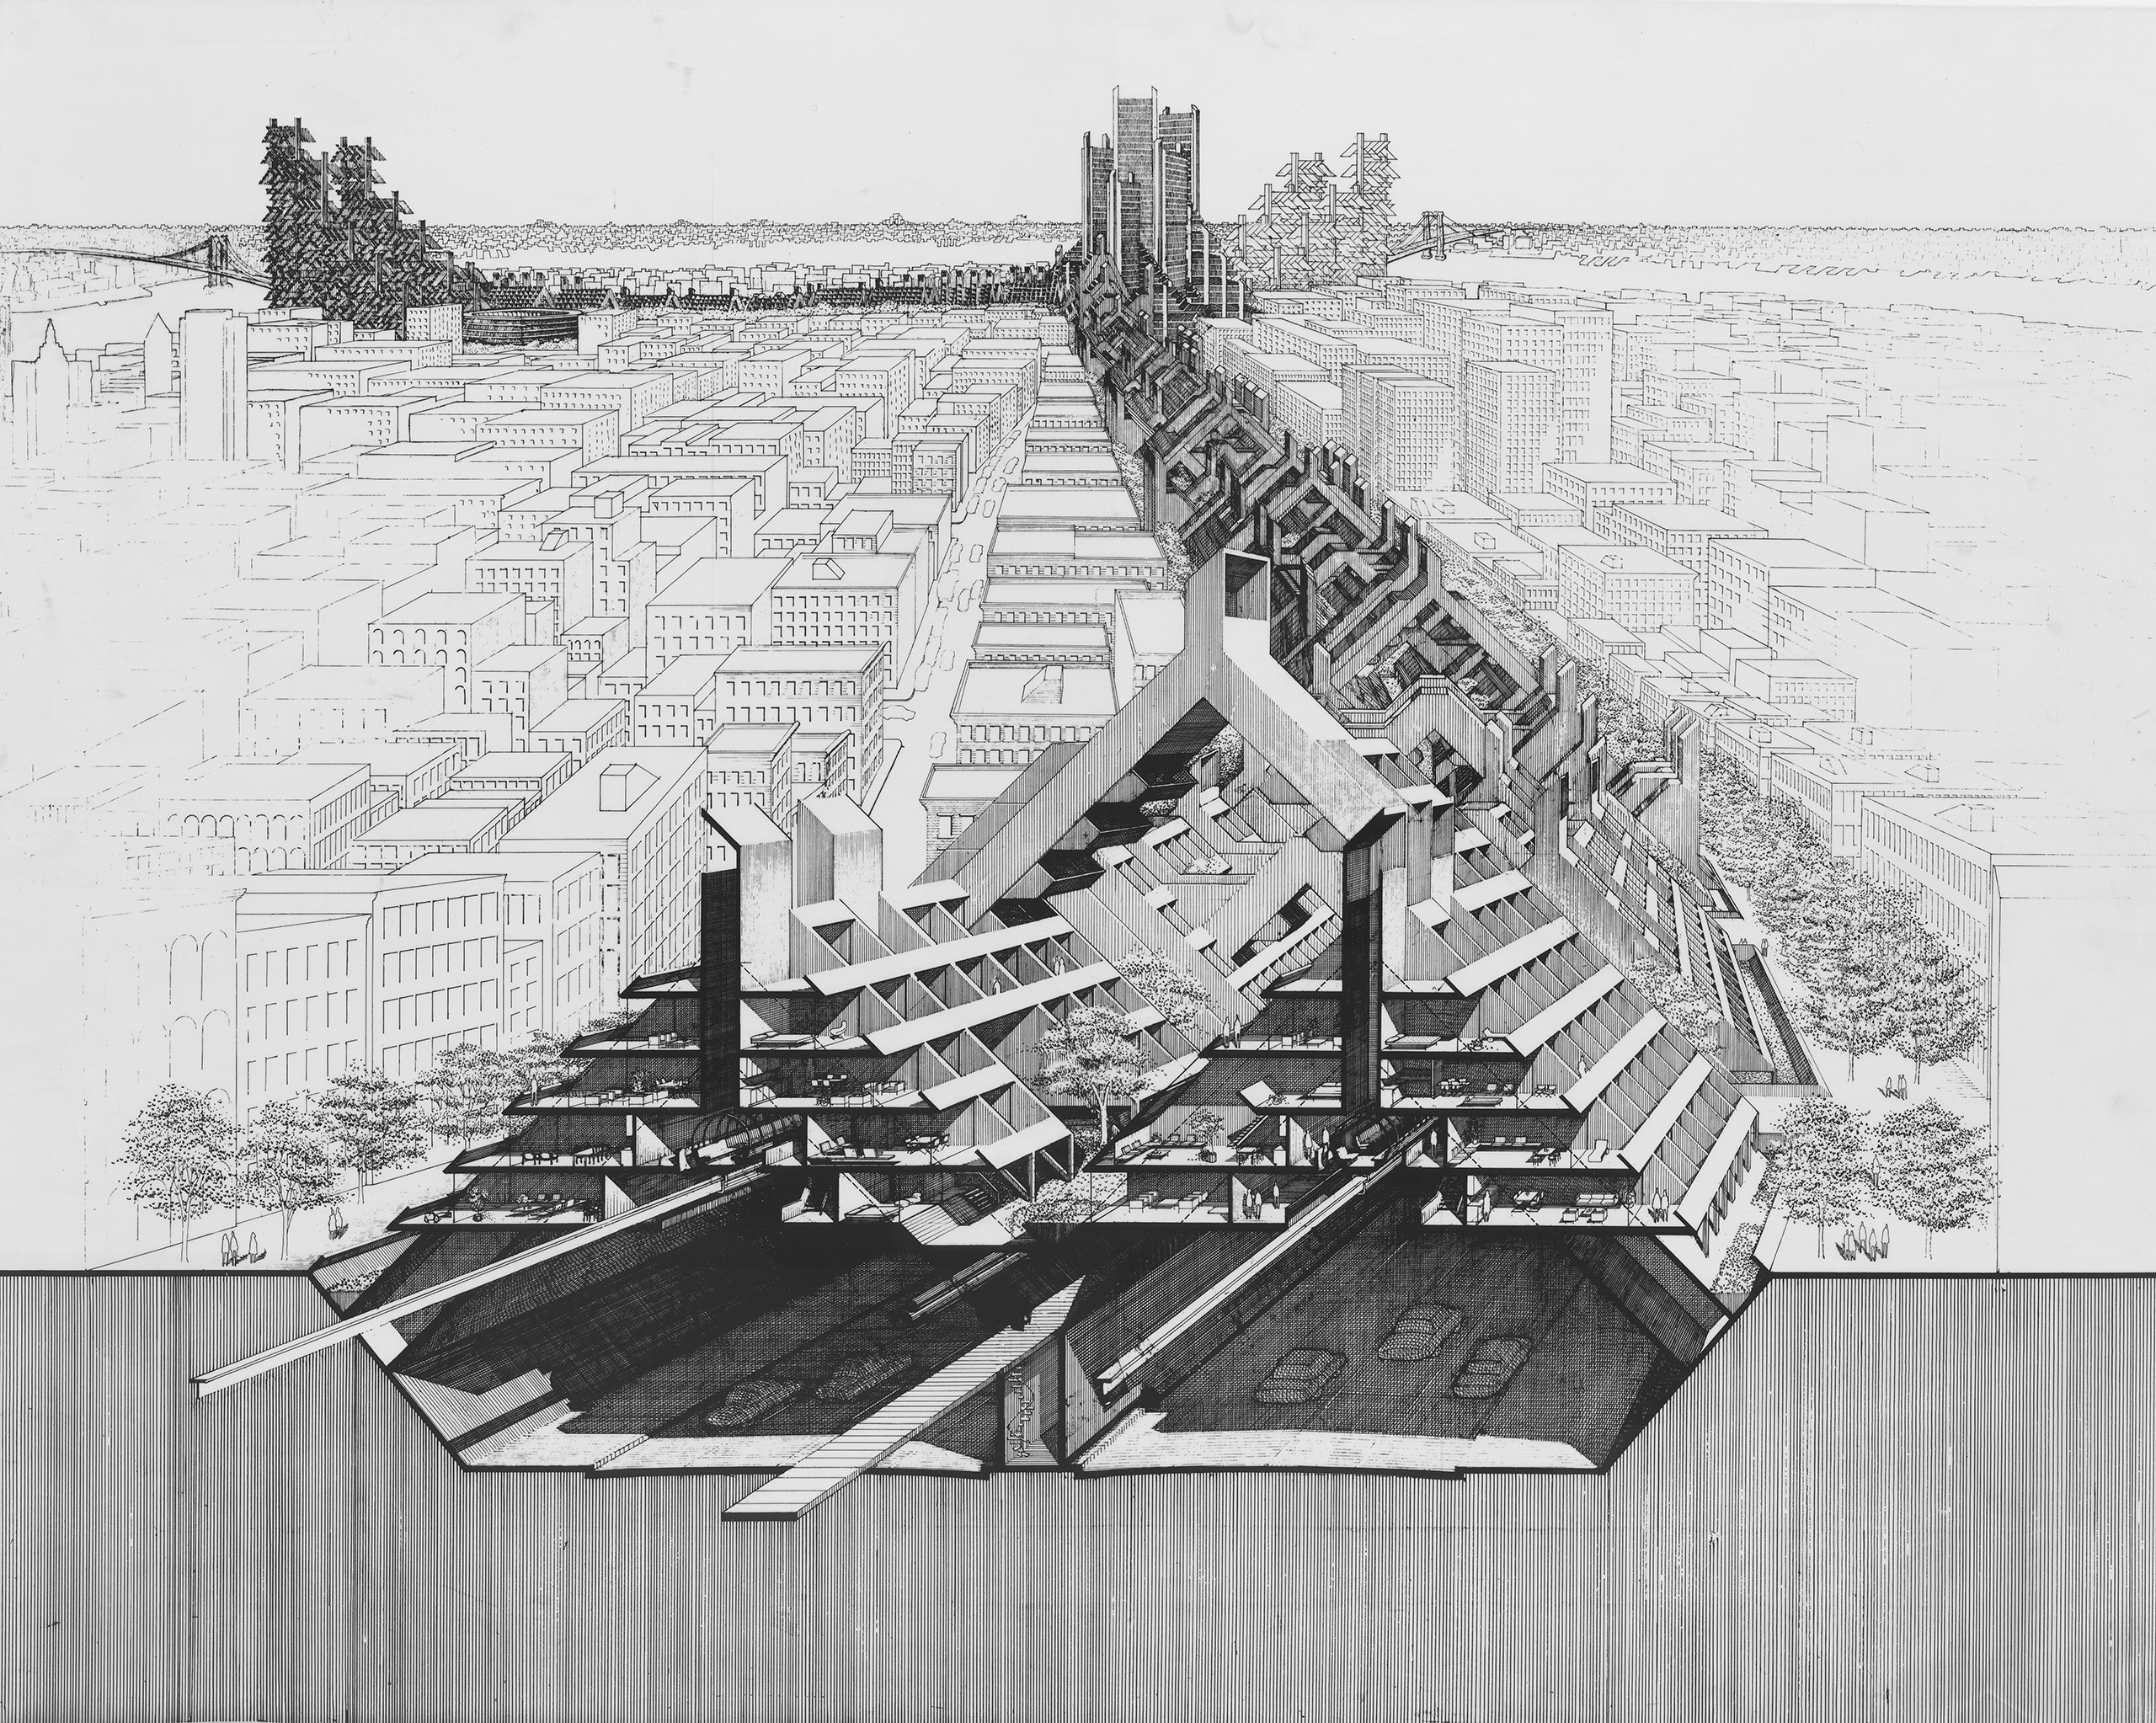 Concept renderings of Robert Moses' proposed LOMEX (Lower Manhattan Expressway).